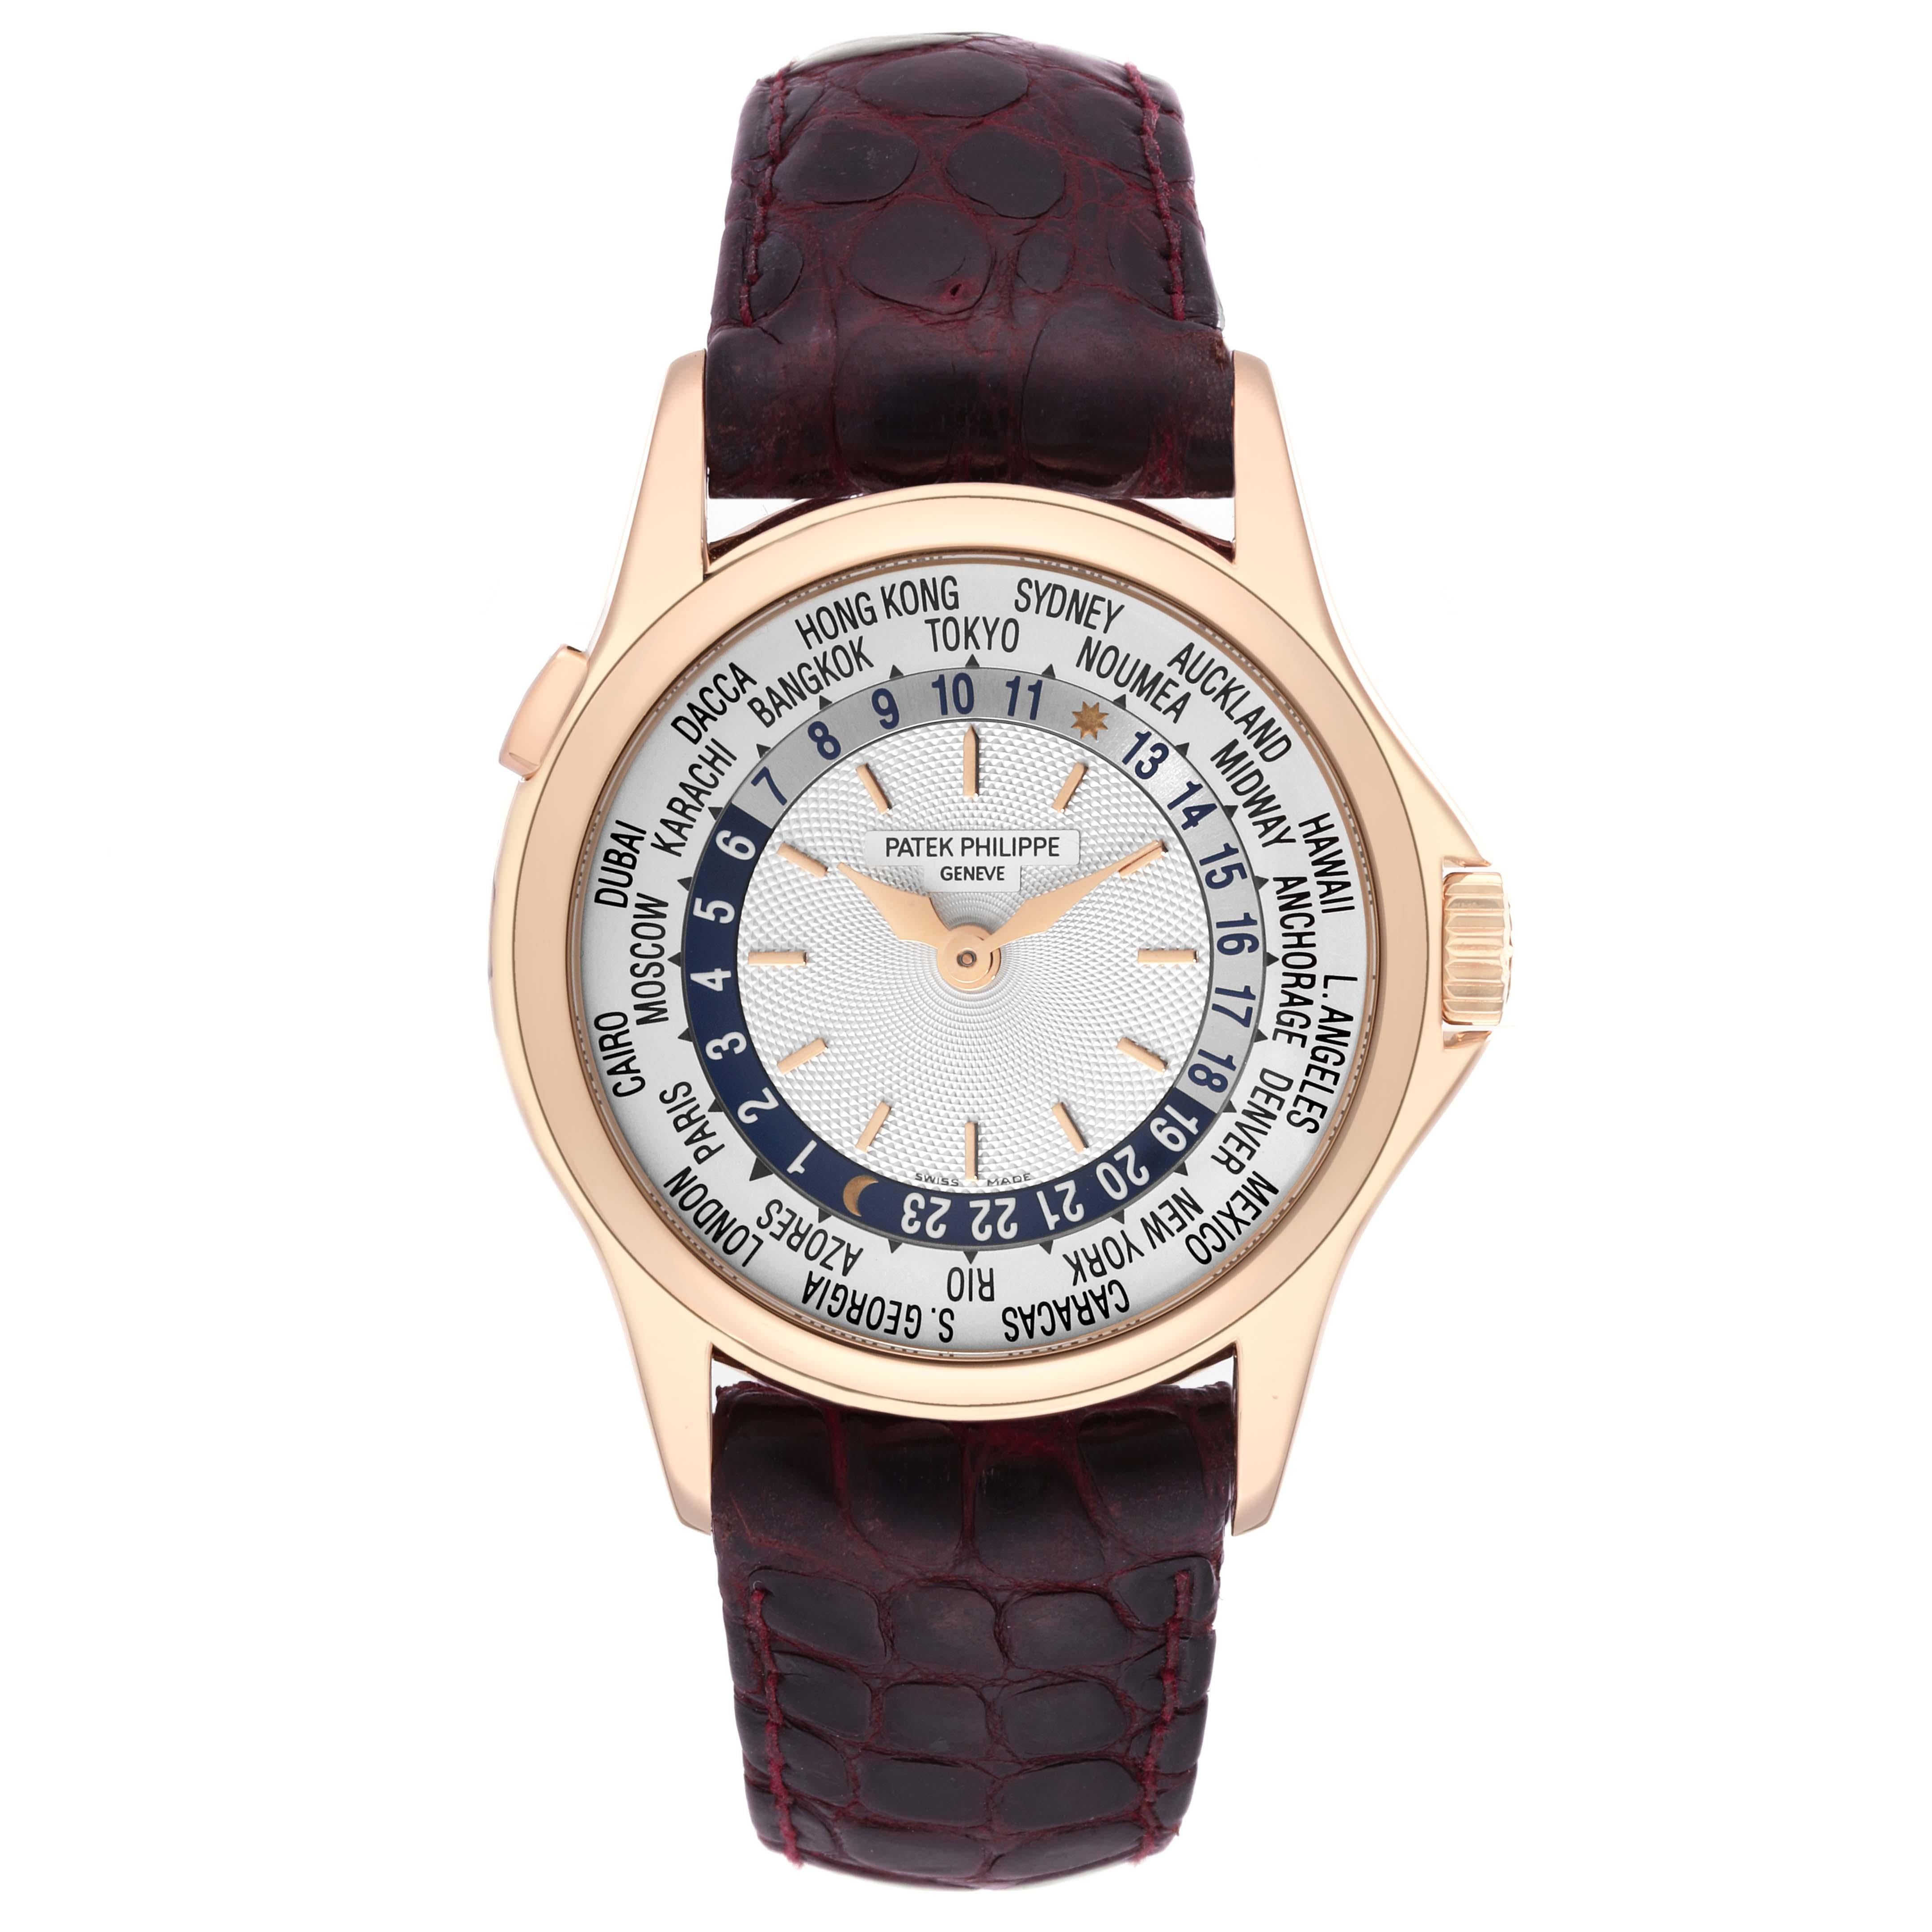 Patek Philippe World Time Automatic Silver Dial Rose Gold Mens Watch 5110. Automatic self-winding movement. Rhodium-plated with fausses cotes embellishment. Straight-line lever escapement, a 22K gold mini rotor, an anti-shock device, and a